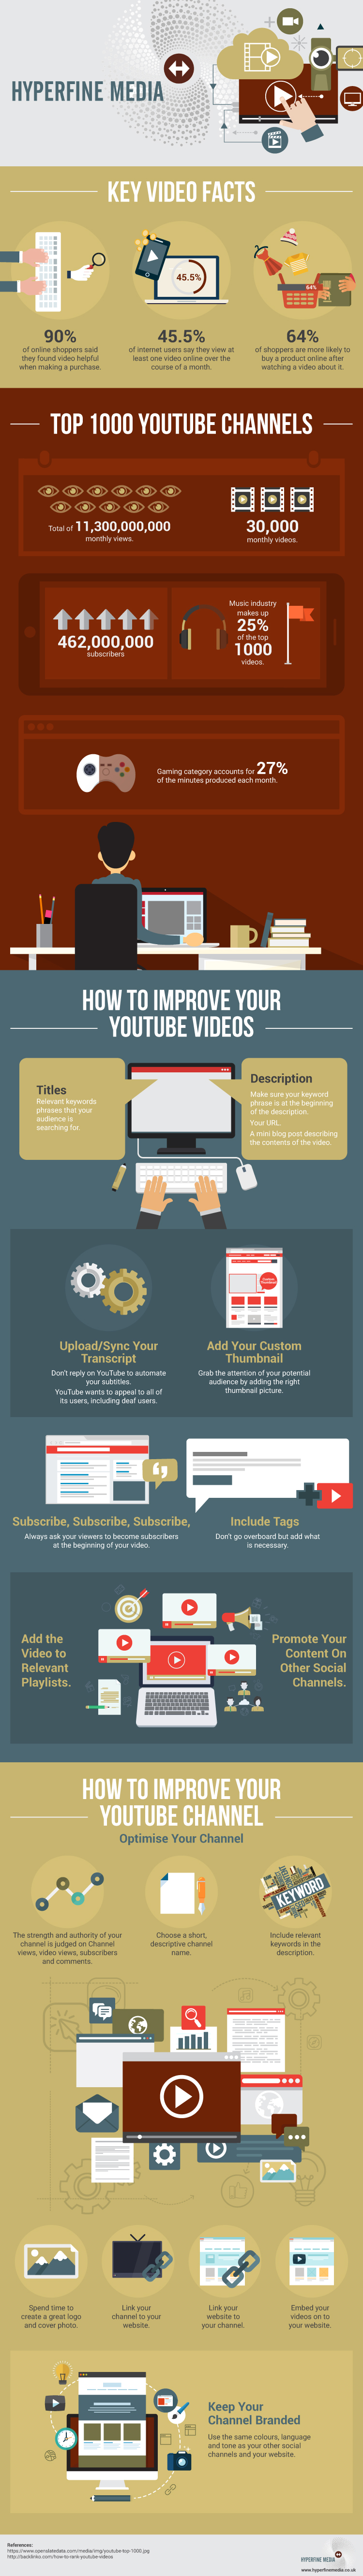 Hyperfine - Improve Your Youtube Videos Infographic